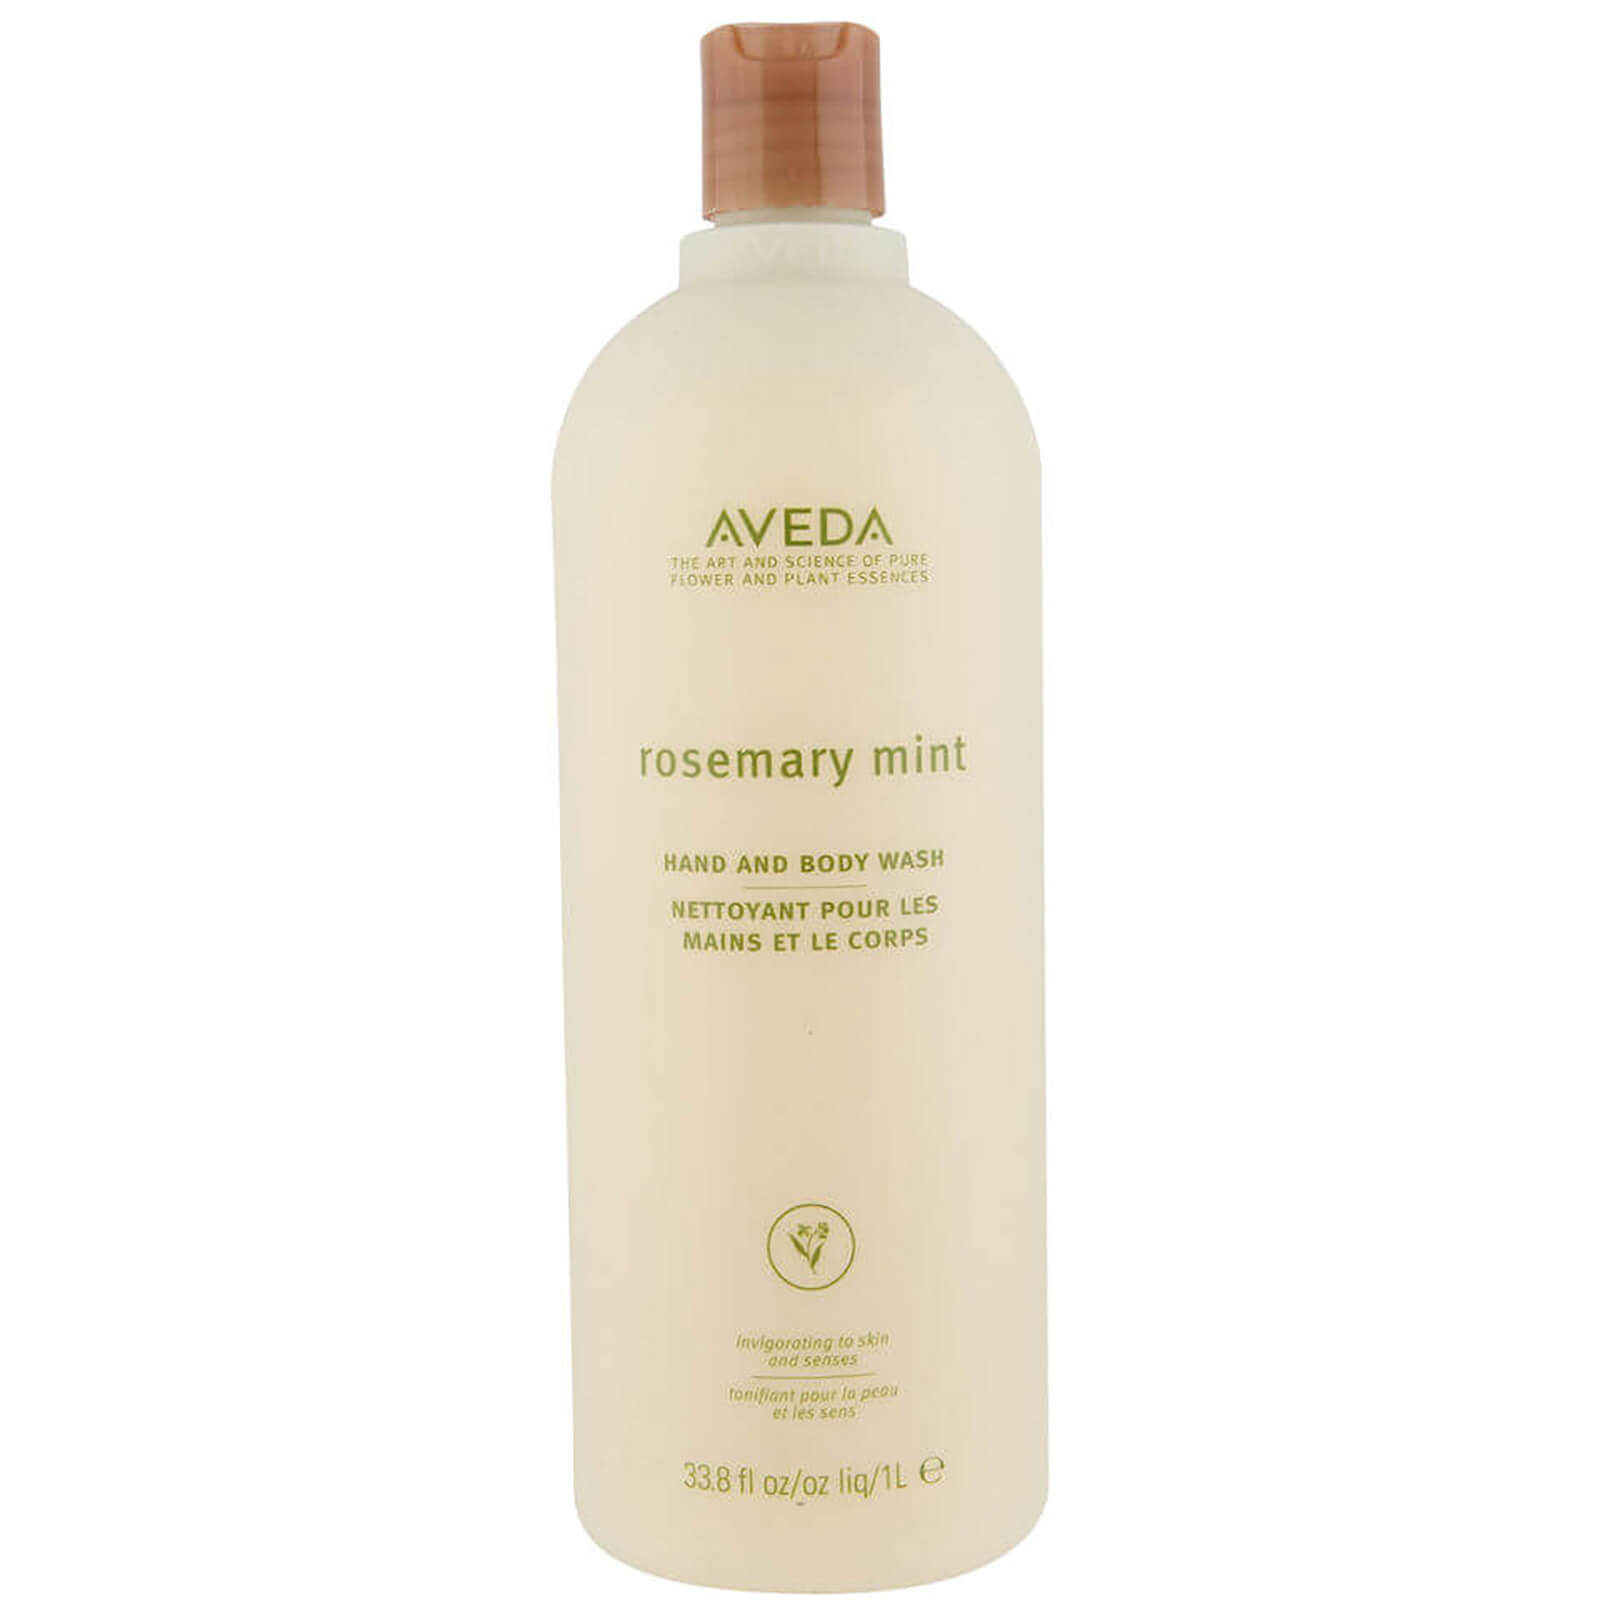 Image of Aveda Rosemary Mint Hand and Body Wash 1L